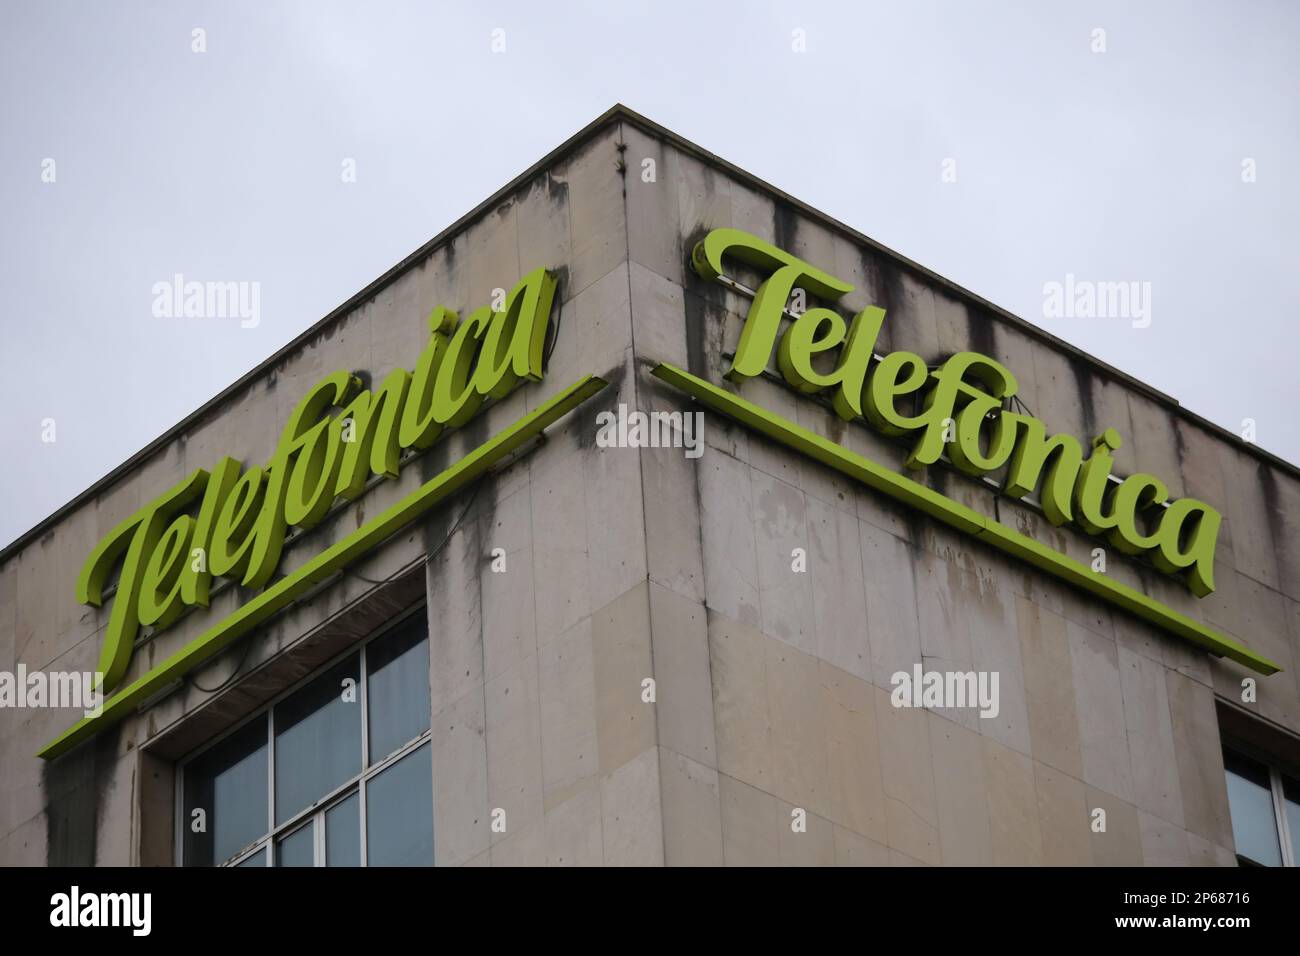 Oviedo, Spain, 7th March, 2023: Telefónica signs on the building during Telefónica Spain invoice 12.497 million in 2022 on March 07, 2023, in Oviedo, Spain. Credit: Alberto Brevers / Alamy Live News Stock Photo